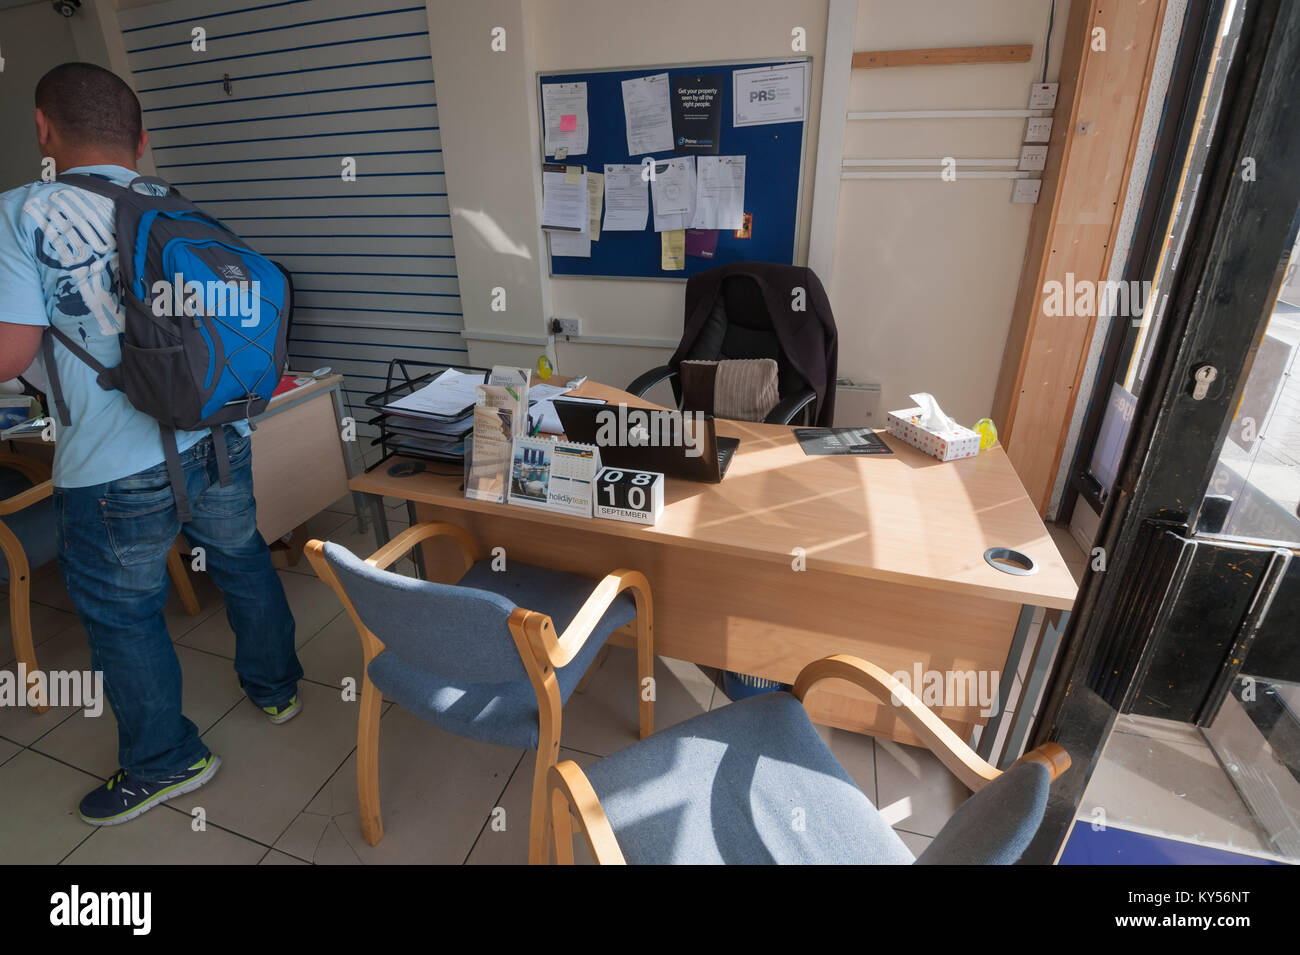 This single desk by the window is the office of Hunter Home Properties Ltd. Stock Photo